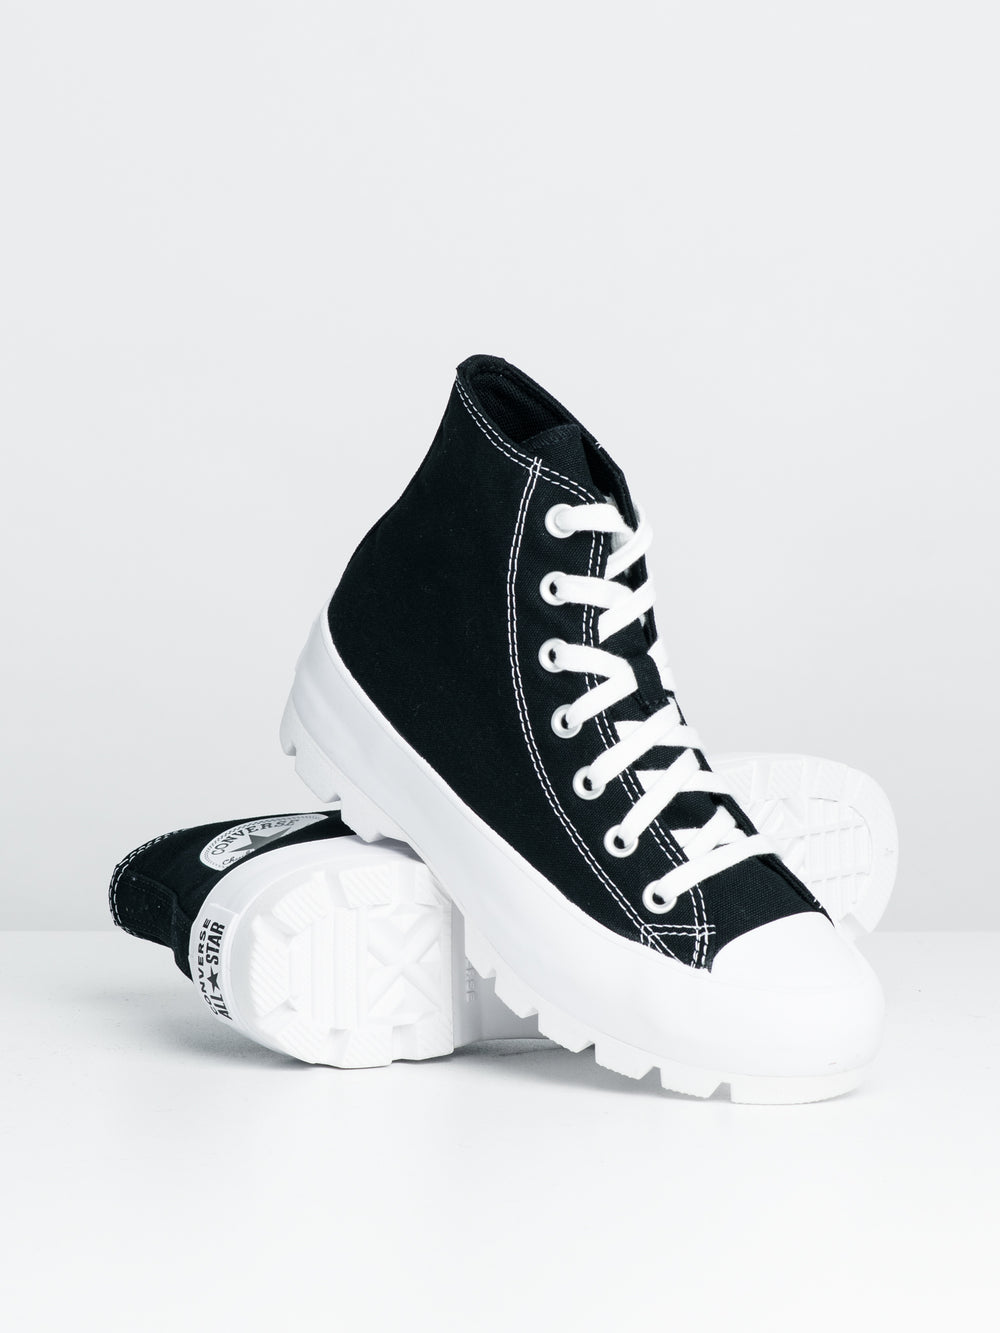 WOMENS CONVERSE CTAS LUGGED CANVAS SNEAKERS - CLEARANCE